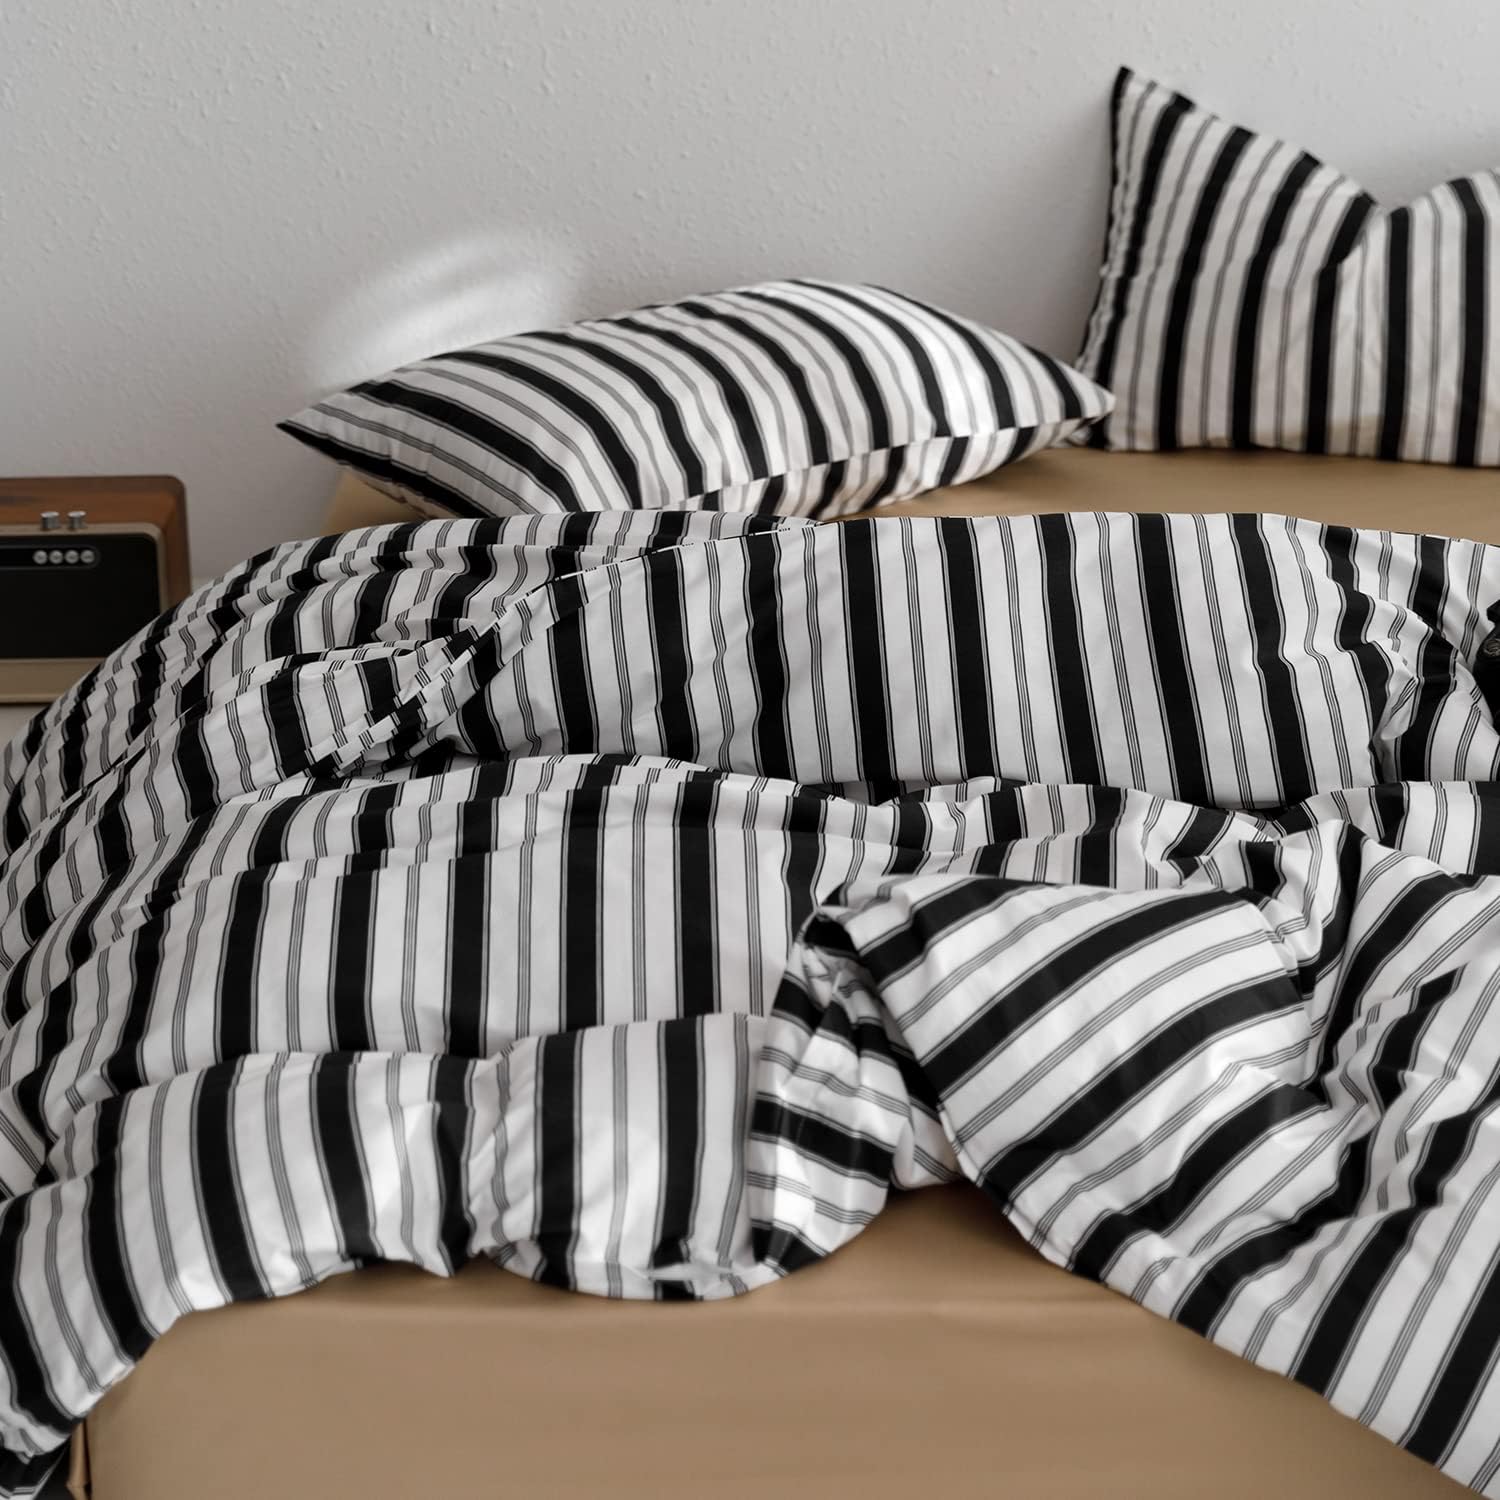 FADFAY Black and White Striped Duvet Cover Full Size 100% Cotton Grey Patterned Comforter Cover Zipper Ties Luxury Soft Breathable Unisex Printed Modern Farmhouse Bedding 3Pcs, Full